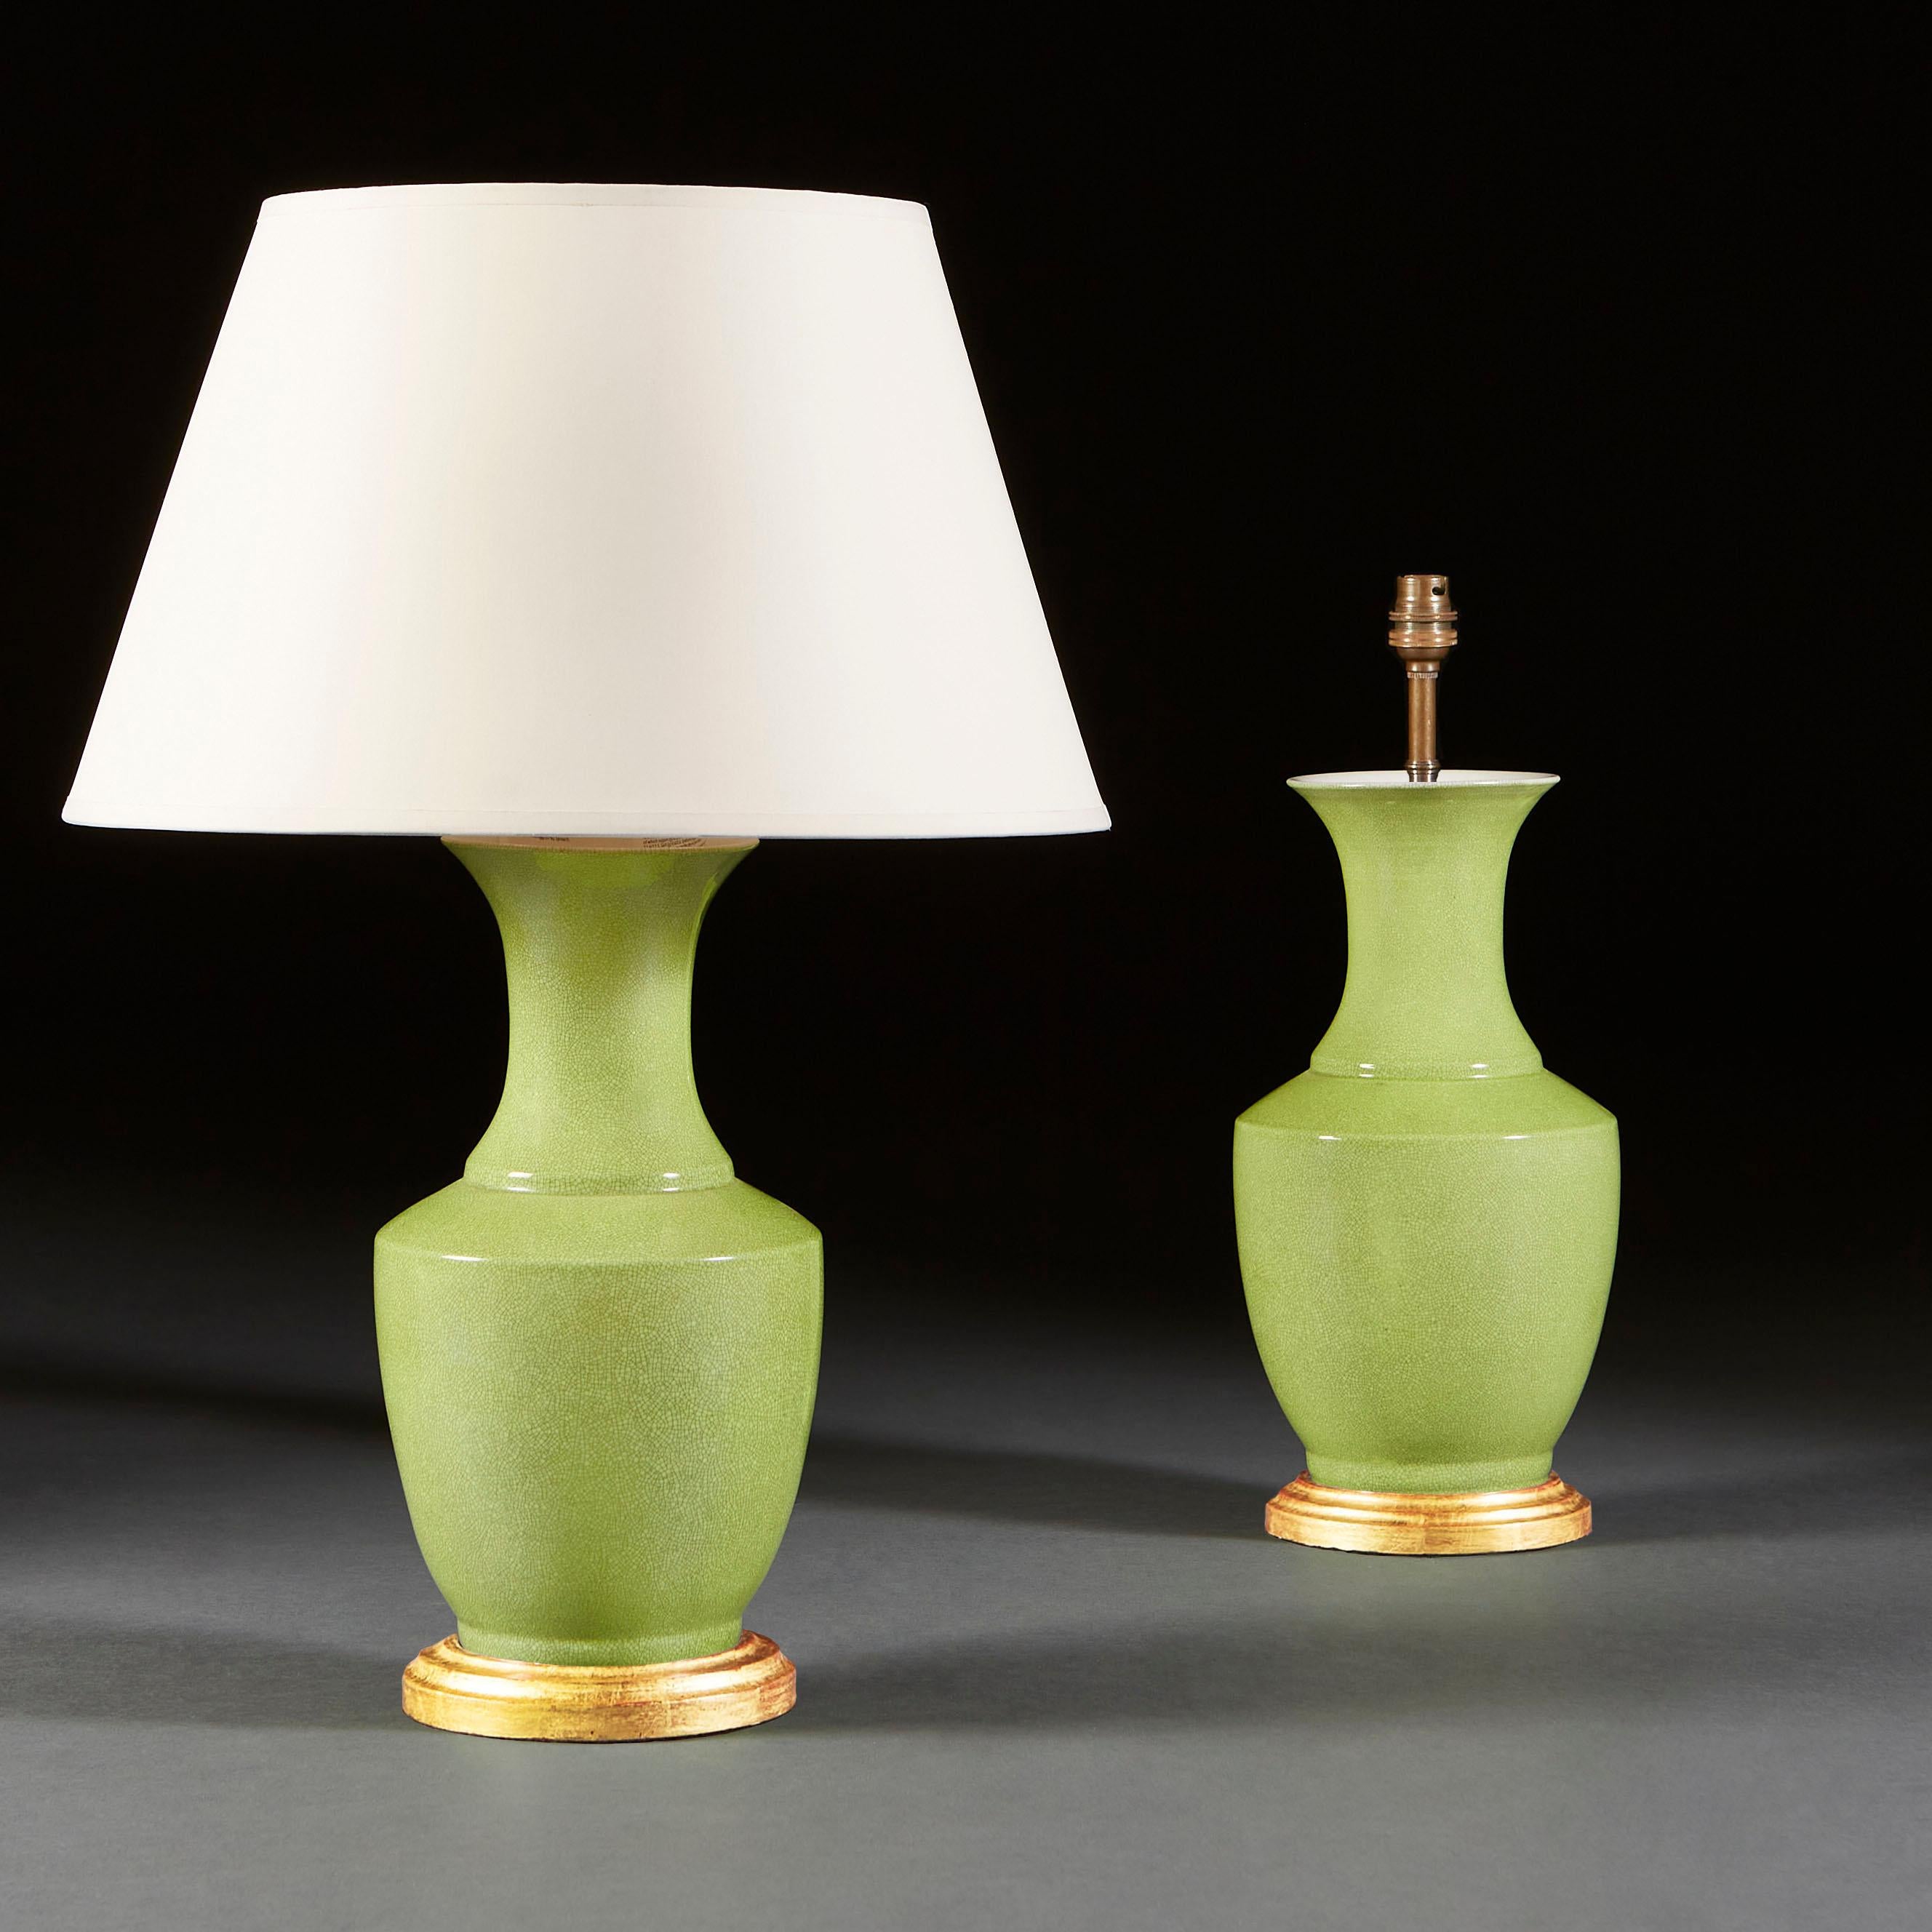 A pair of green ceramic vases as lamps, with flared neck, with gilded bases.

Currently wired for the UK.

Please note: Lampshades not included.